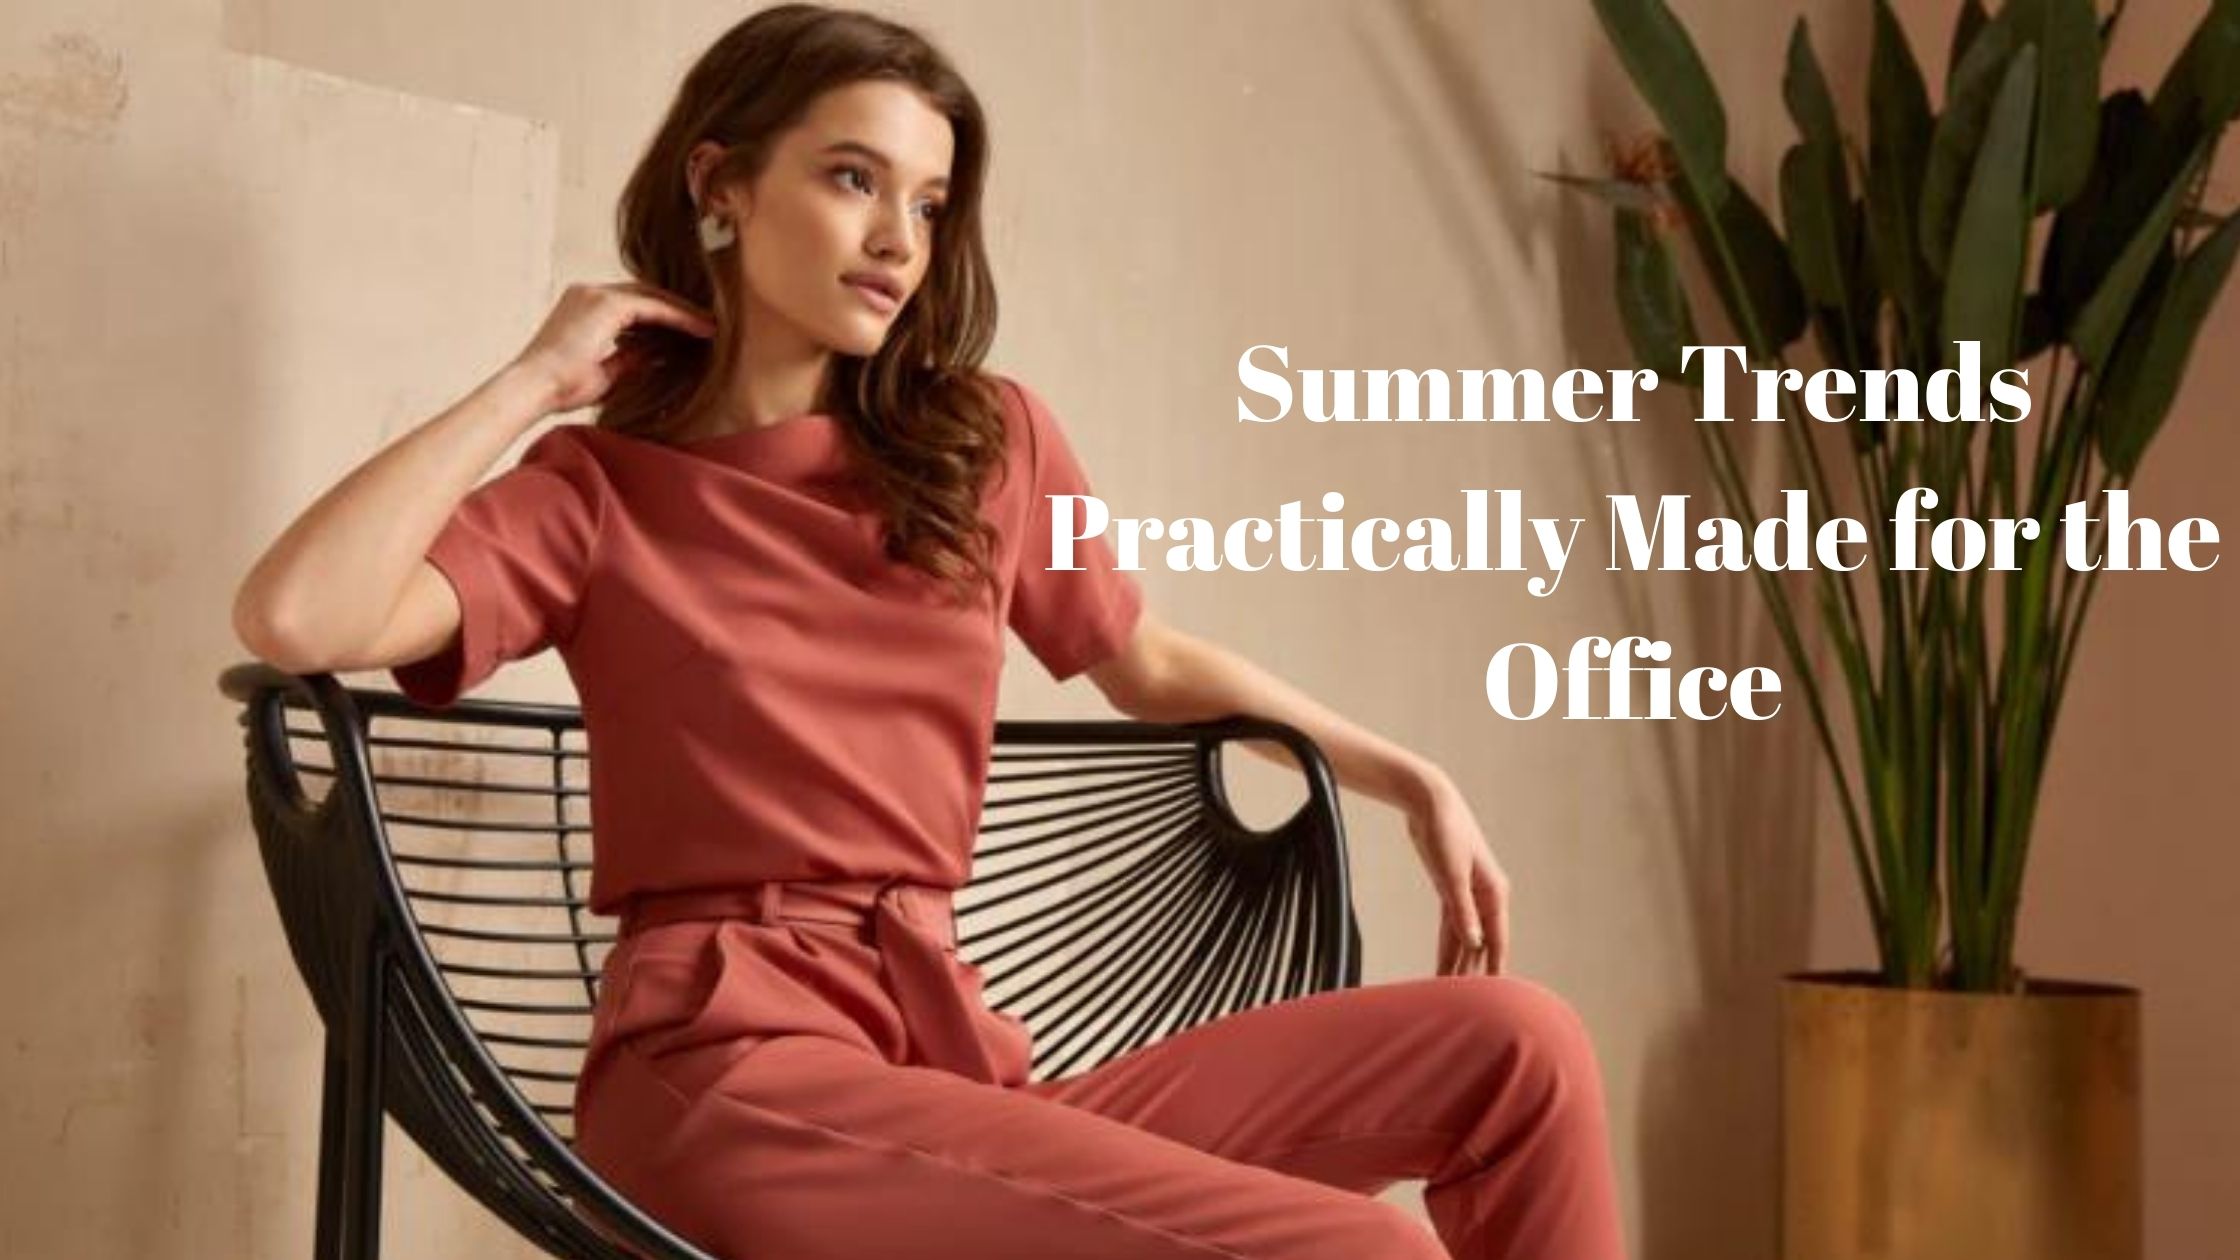 You are currently viewing Summer Trends Practically Made for the Office